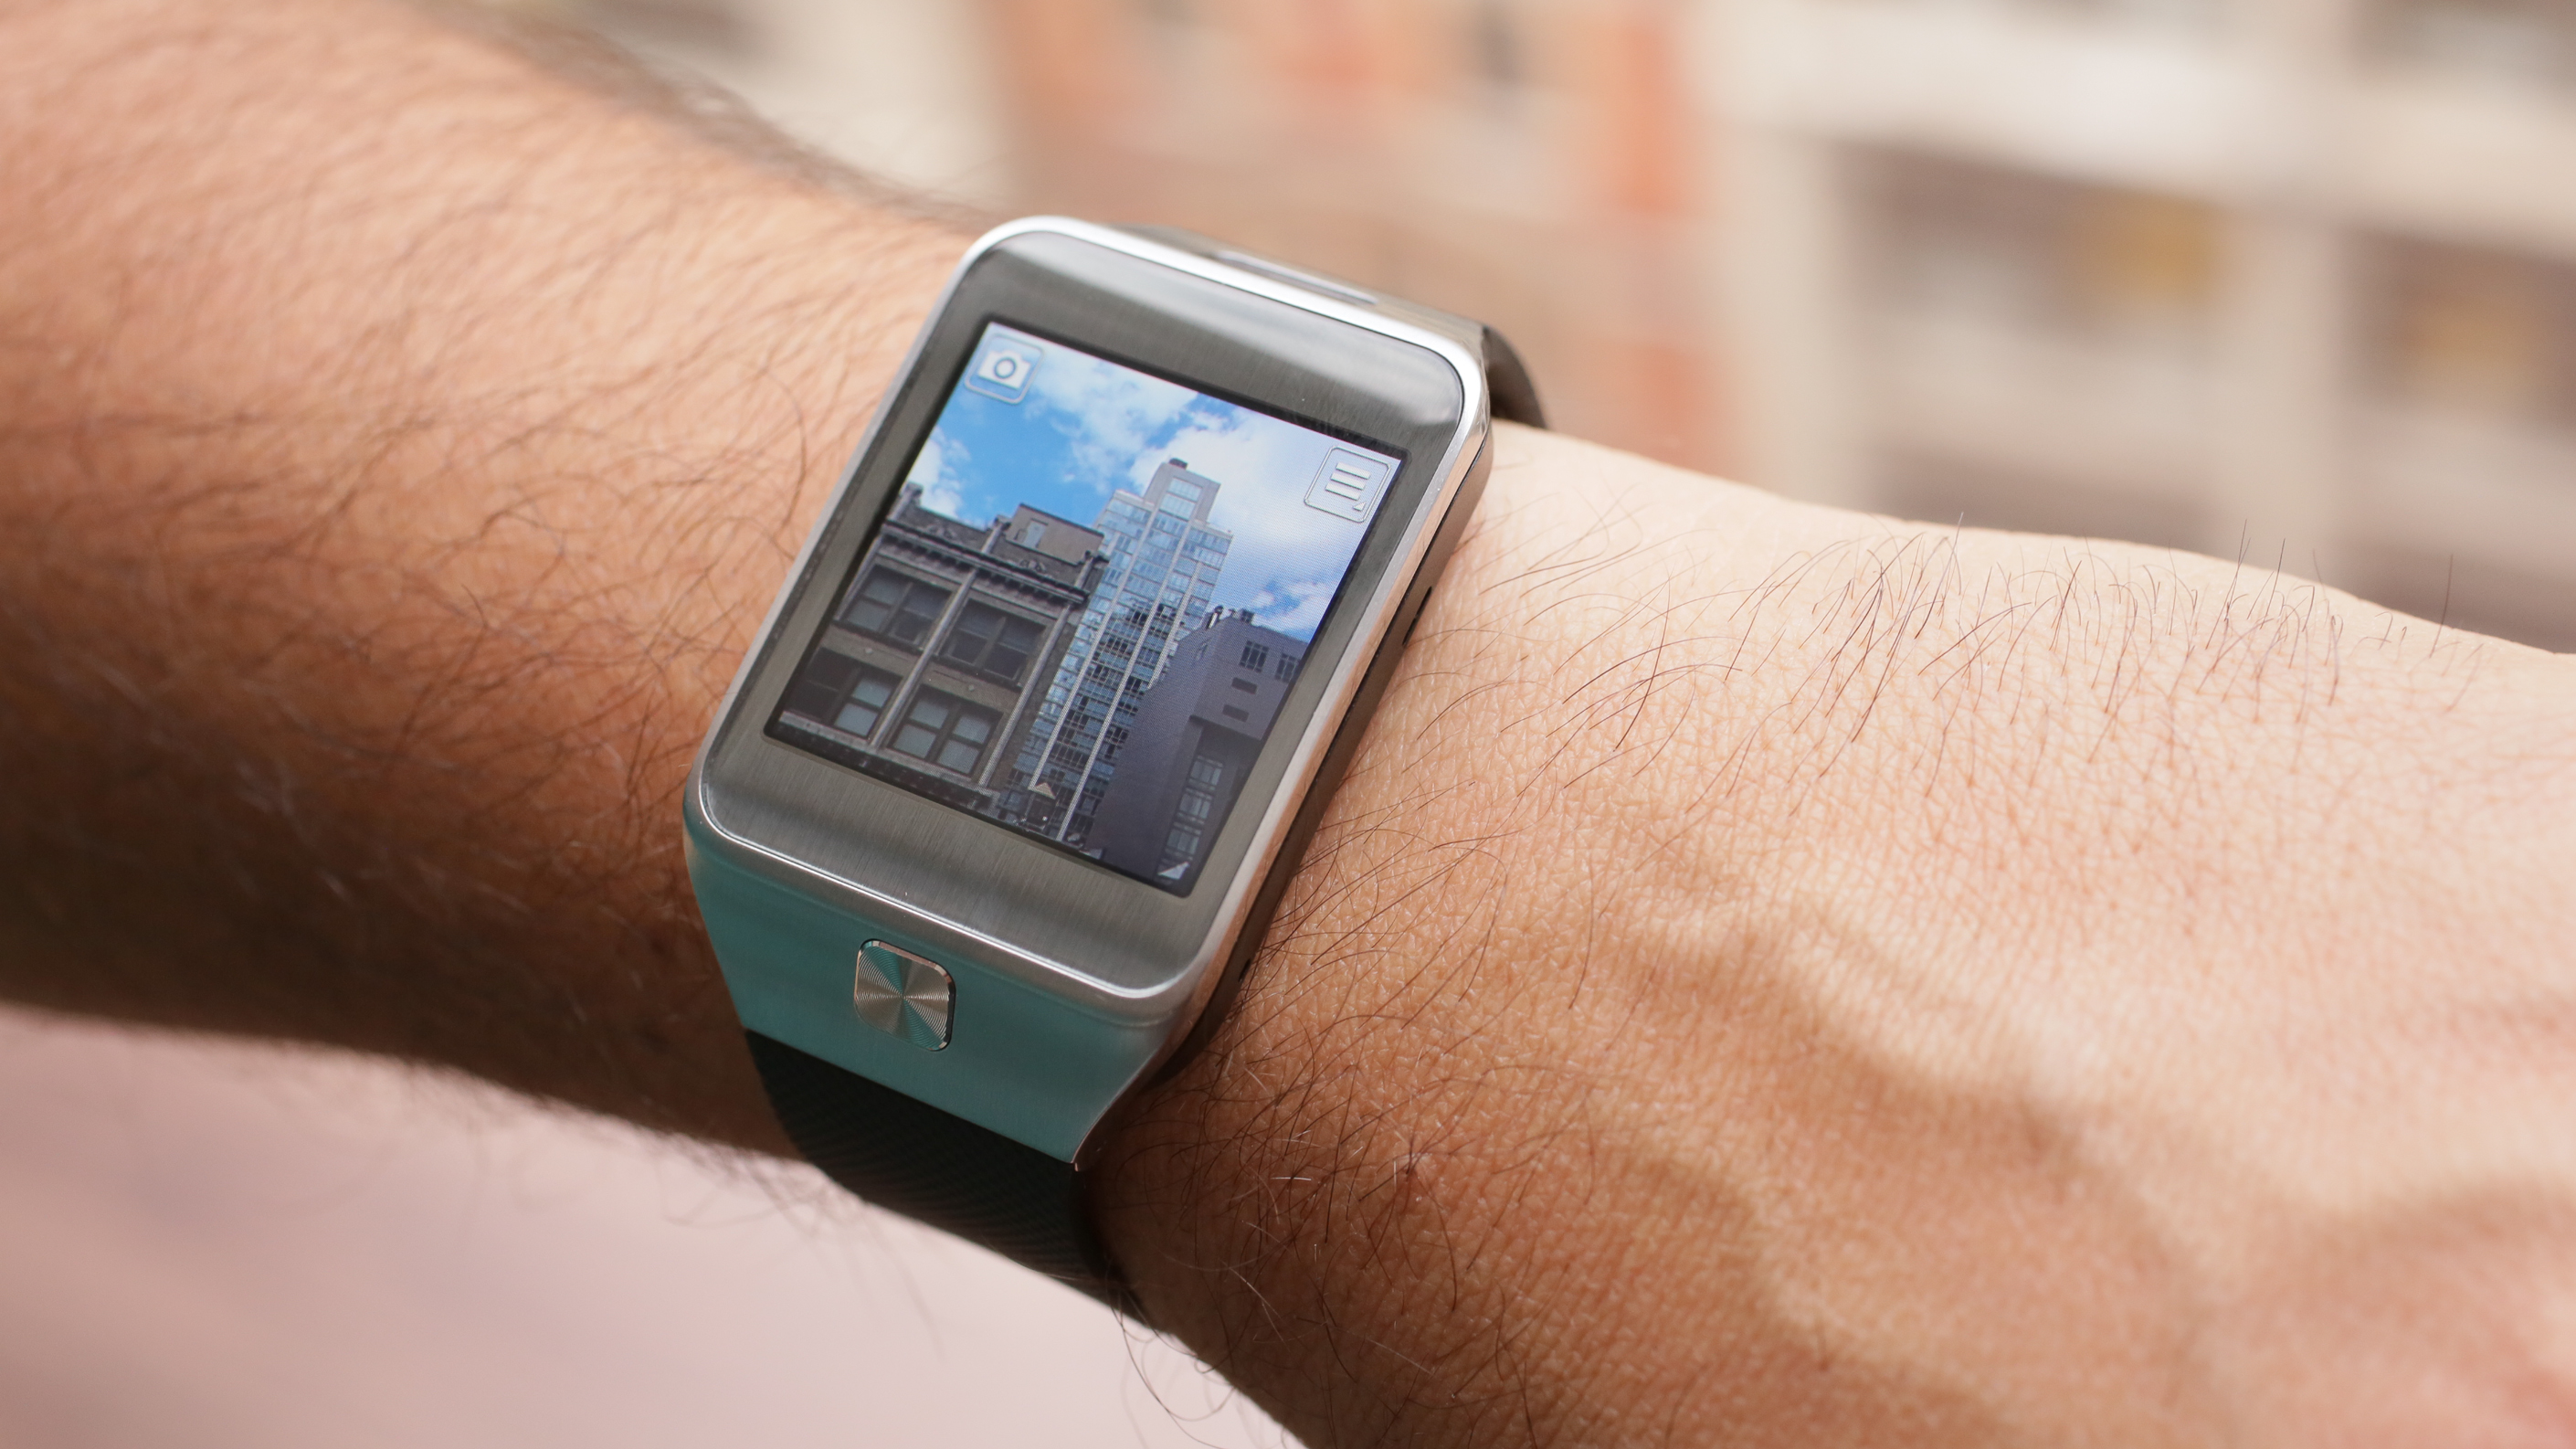 snelweg Noord Omgaan met Samsung Gear 2 review: A smartwatch that tries to be everything - CNET